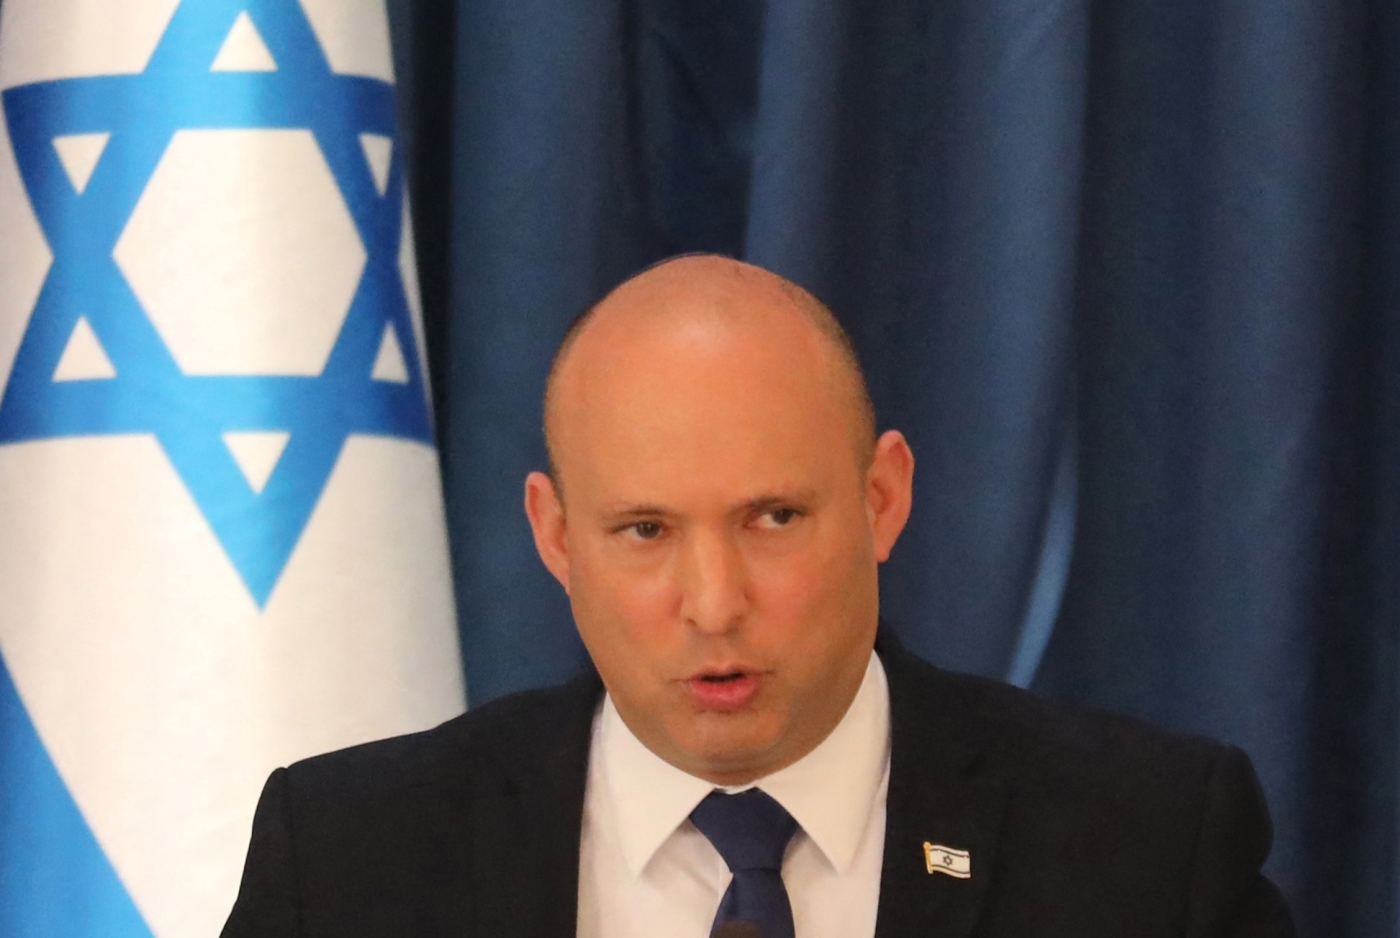 After travelling to Washington, Bennett said he will meet with German Chancellor Angela Merkel and Egypt's President Abdel Fattah el-Sisi.